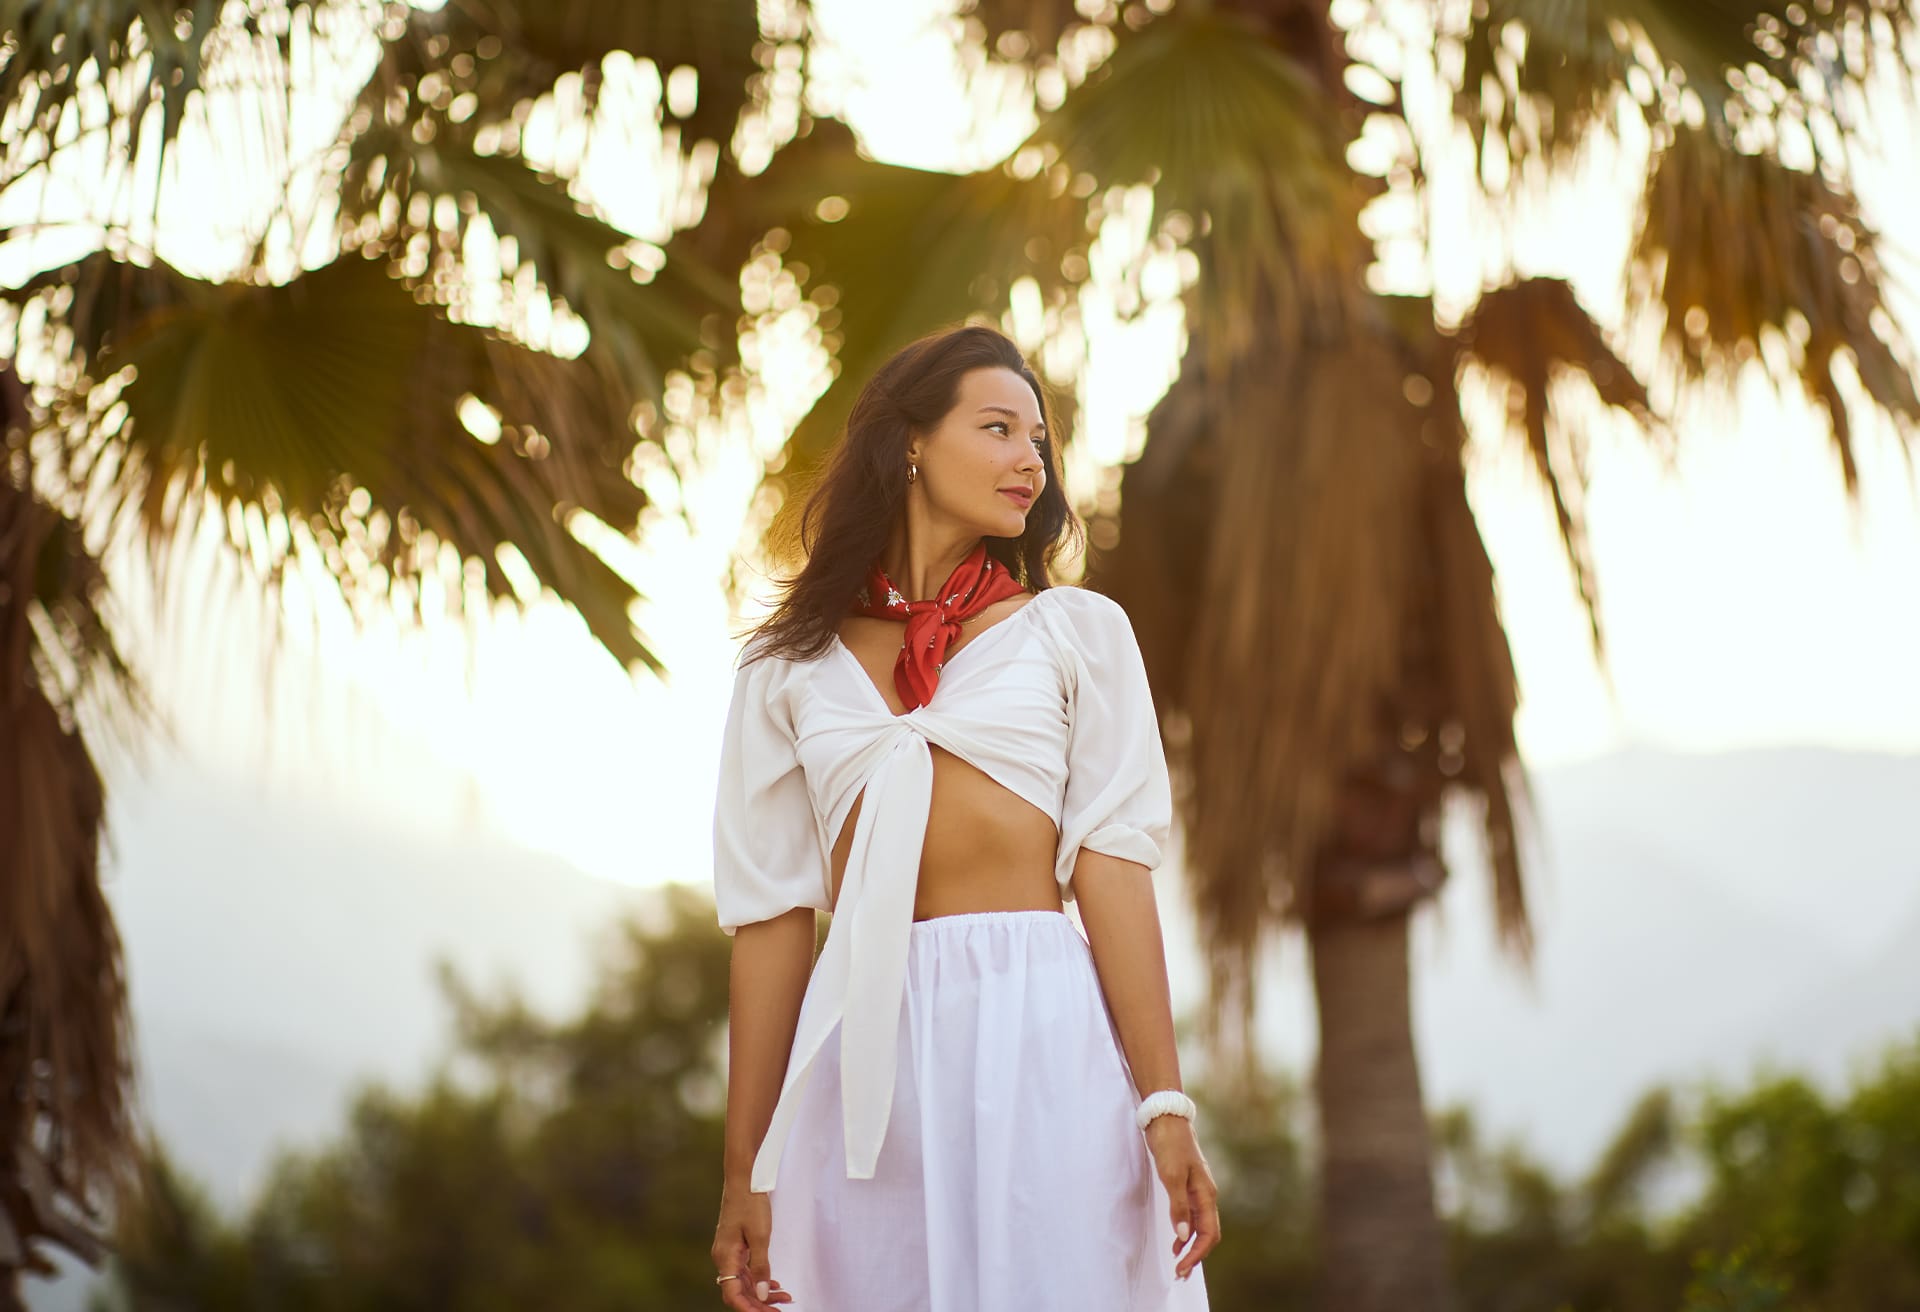 Woman with a red scarf tied around her neck with palm trees in the background